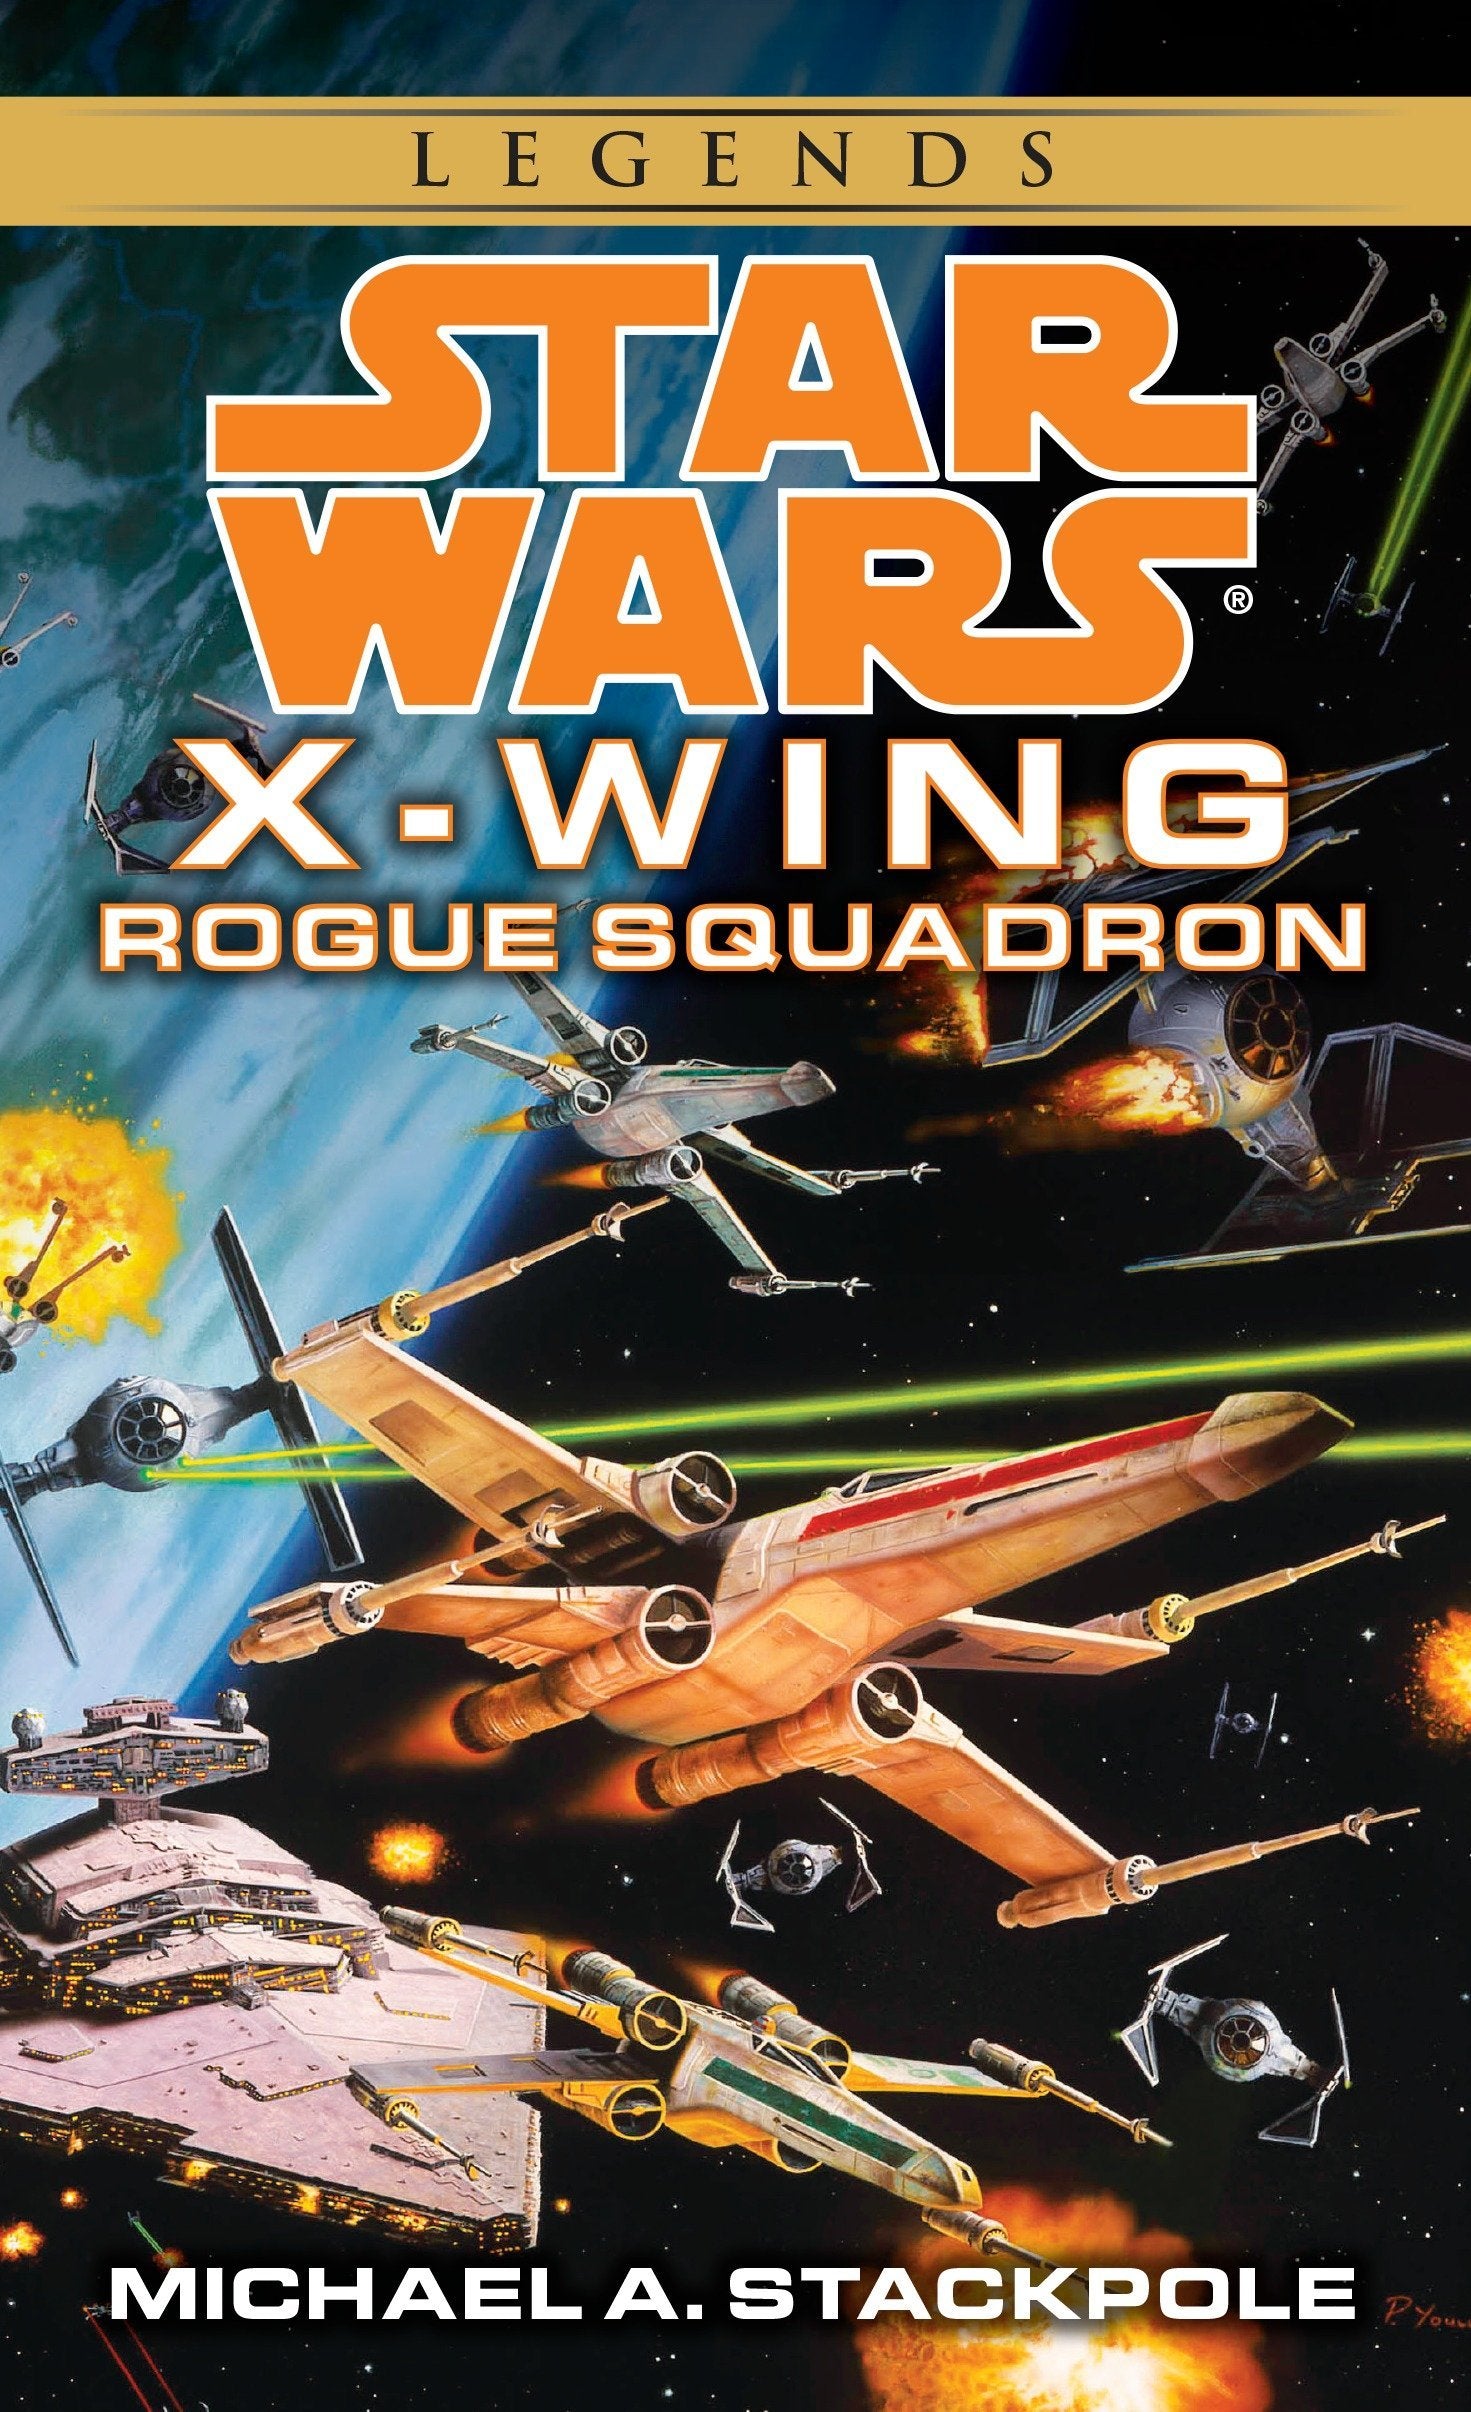 Livre ISBN 0553568019 Star Wars Legends : X-Wing # 1 : Rogue Squadron (Michael A. Stackpole)